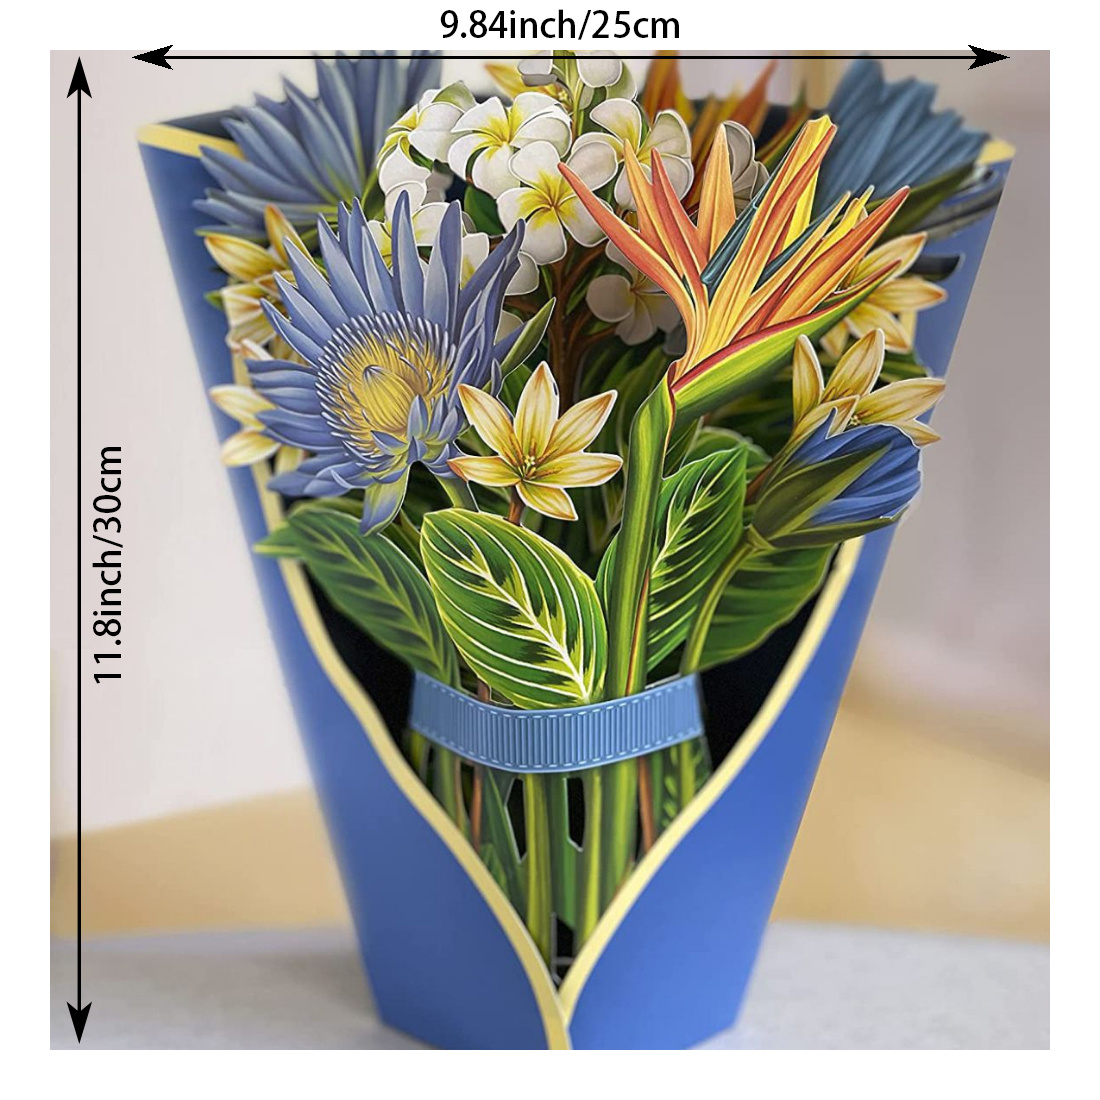 Freshcut Paper Pop Up Cards, Festive Tulips, 12 inch Life Sized Forever  Flower Bouquet 3D Popup Paper Flower Easter Mother's Day Greeting Cards  with